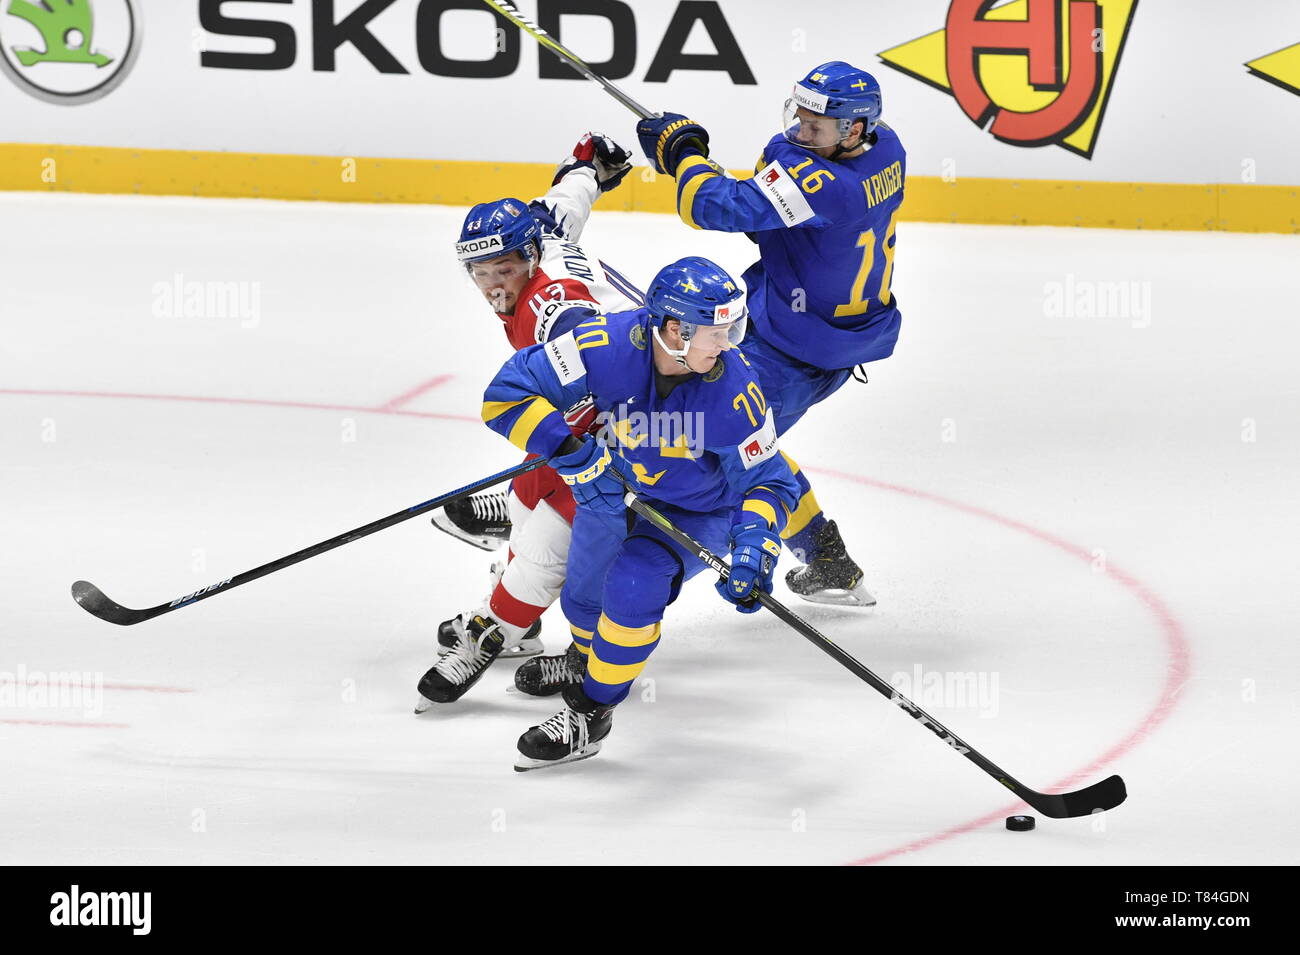 Bratislava, Slovakia. 10th May, 2019. L-R JAN KOVAR (Czech), DENNIS RASMUSSEN and MARCUS KRUGER (both Sweden) in action during the match Czech Republic against Sweden at the World Championship in Bratislava, Slovakia, May 10, 2019. Credit: Vit Simanek/CTK Photo/Alamy Live News Stock Photo